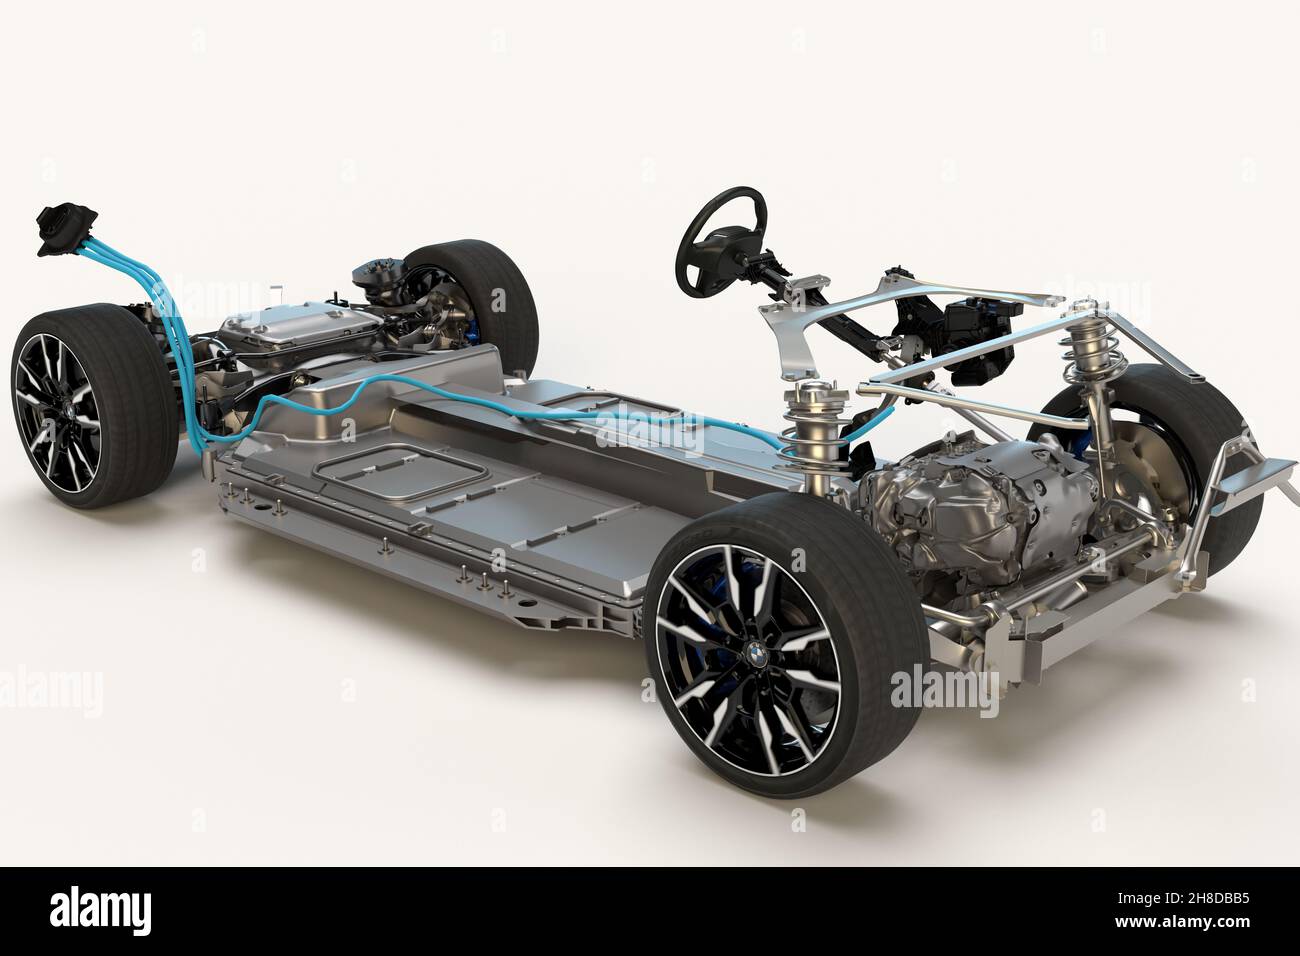 electric-vehicle-cross-section-on-the-bmw-i4-sports-example-2H8DBB5.jpg